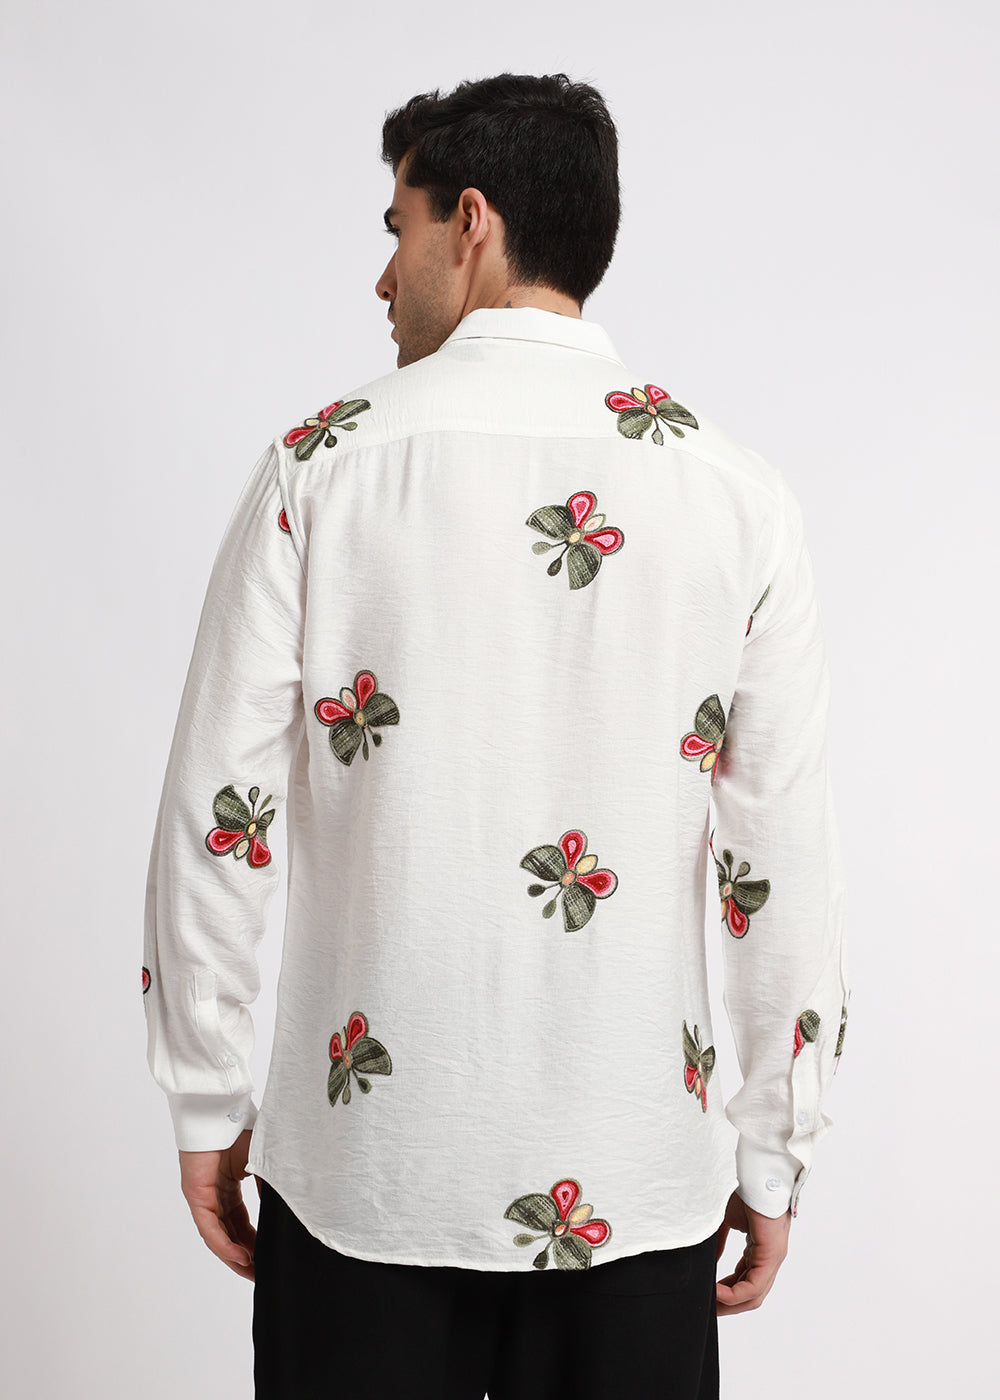 White Butterfly Embroidered Shirt